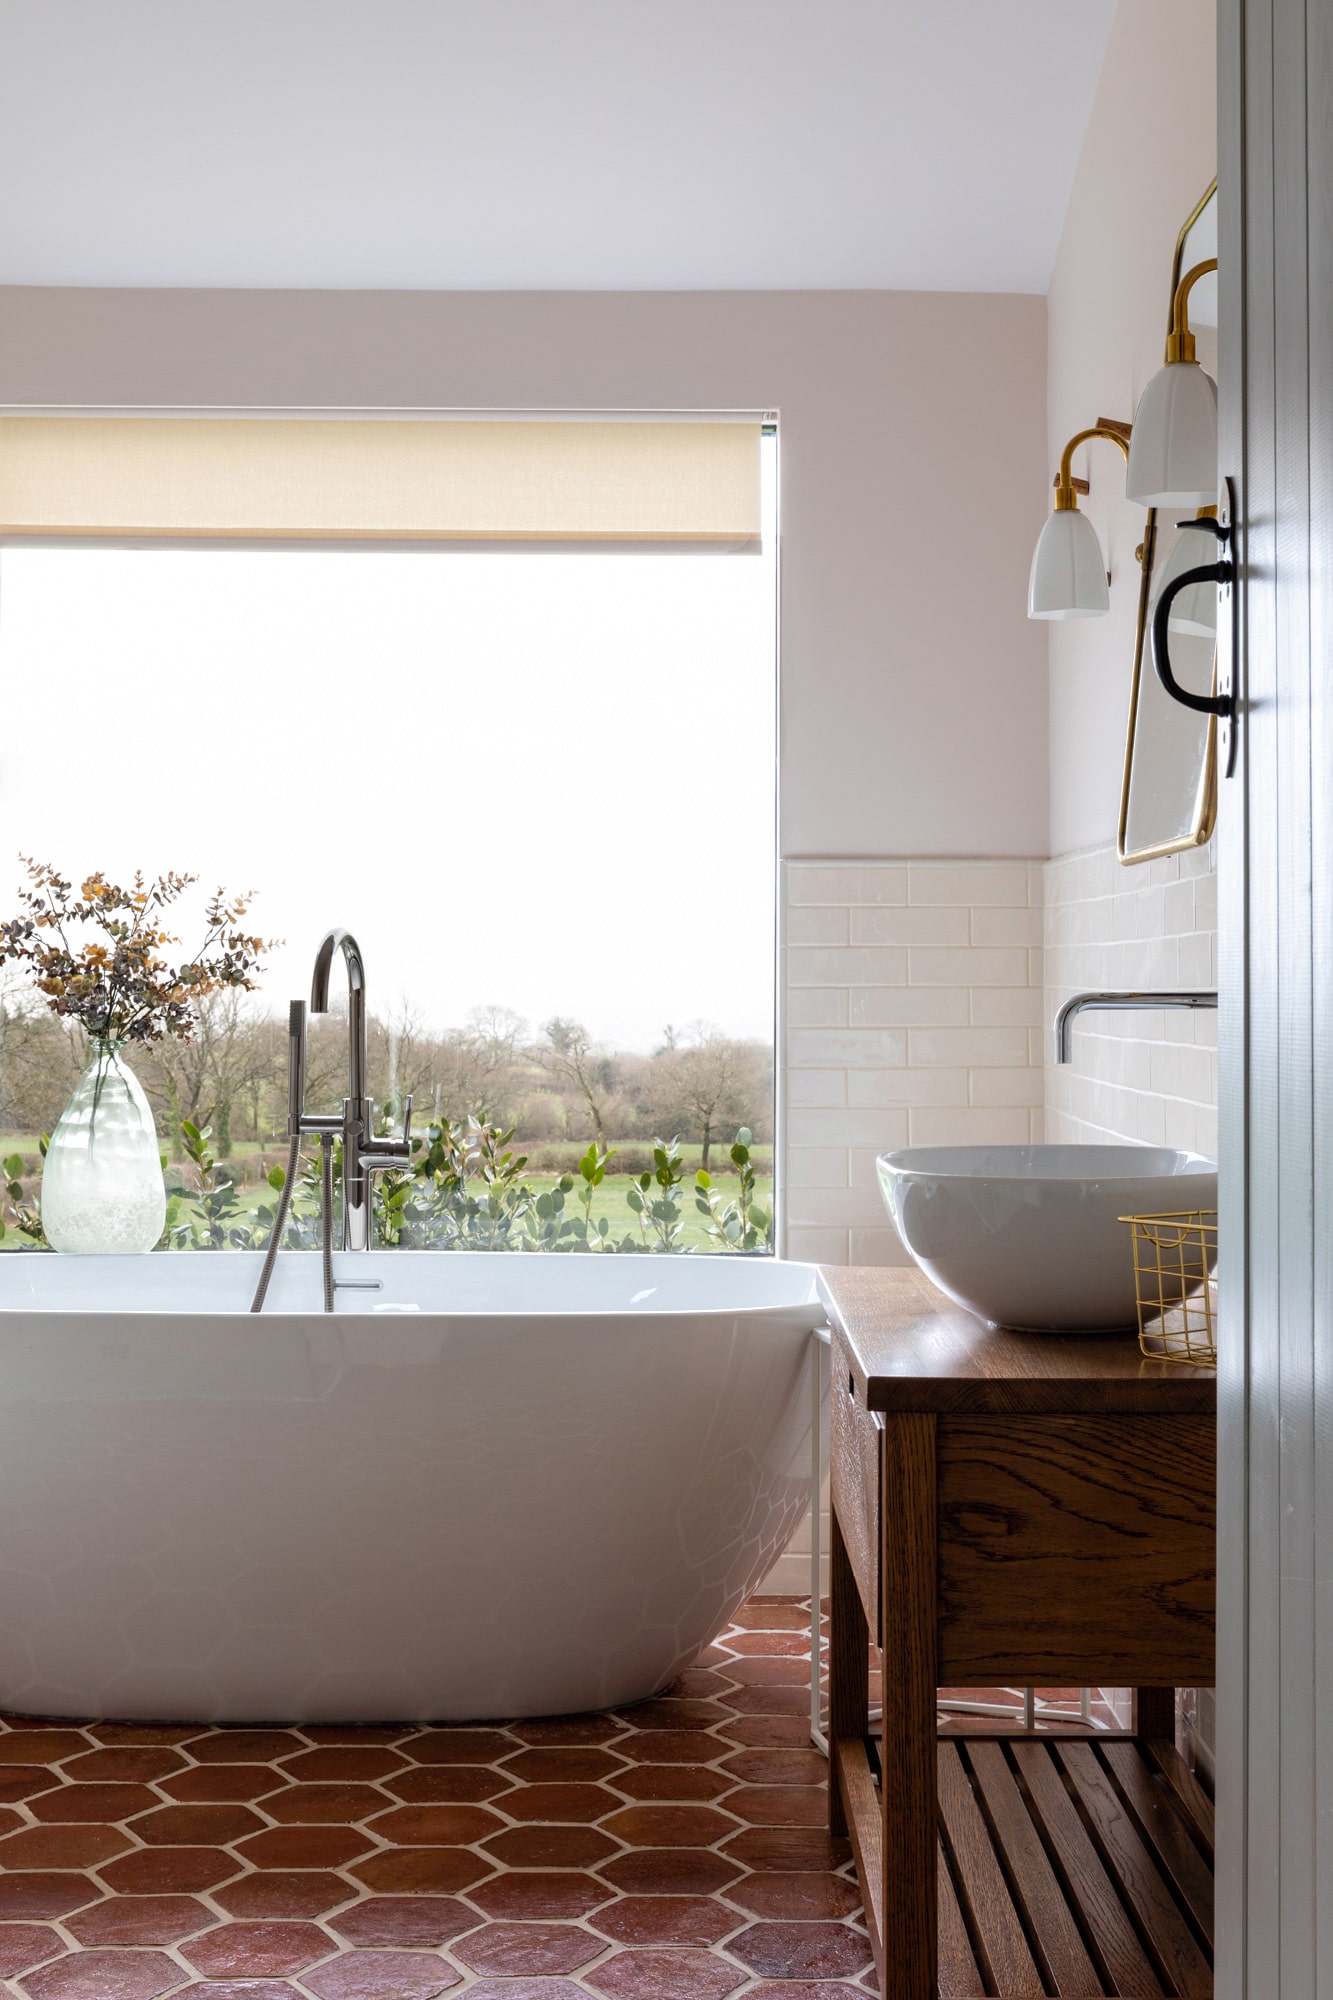 interior photo of a bathroom: round freestanding bath in front of a window with a field view; a round sink with a wooden cupboard